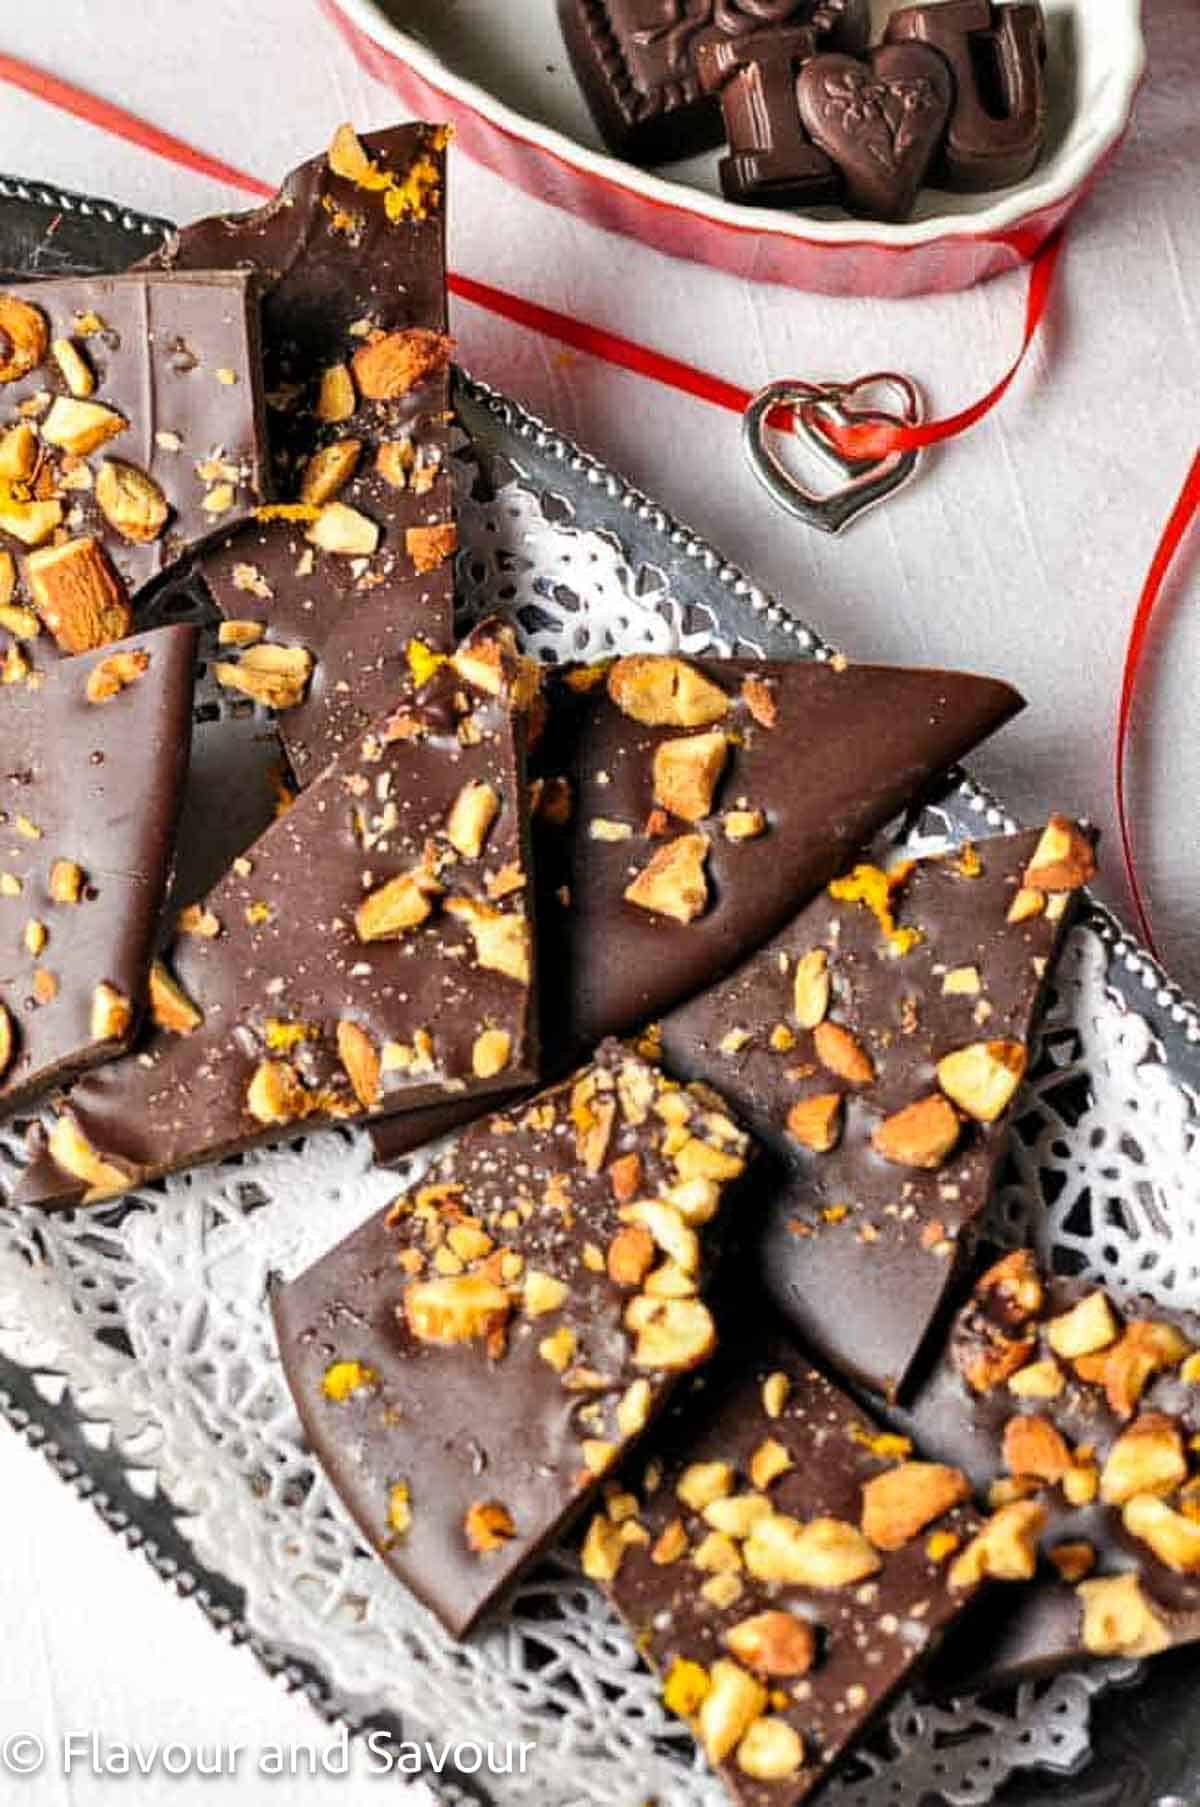 Orange and almond chocolate bark on a silver tray.